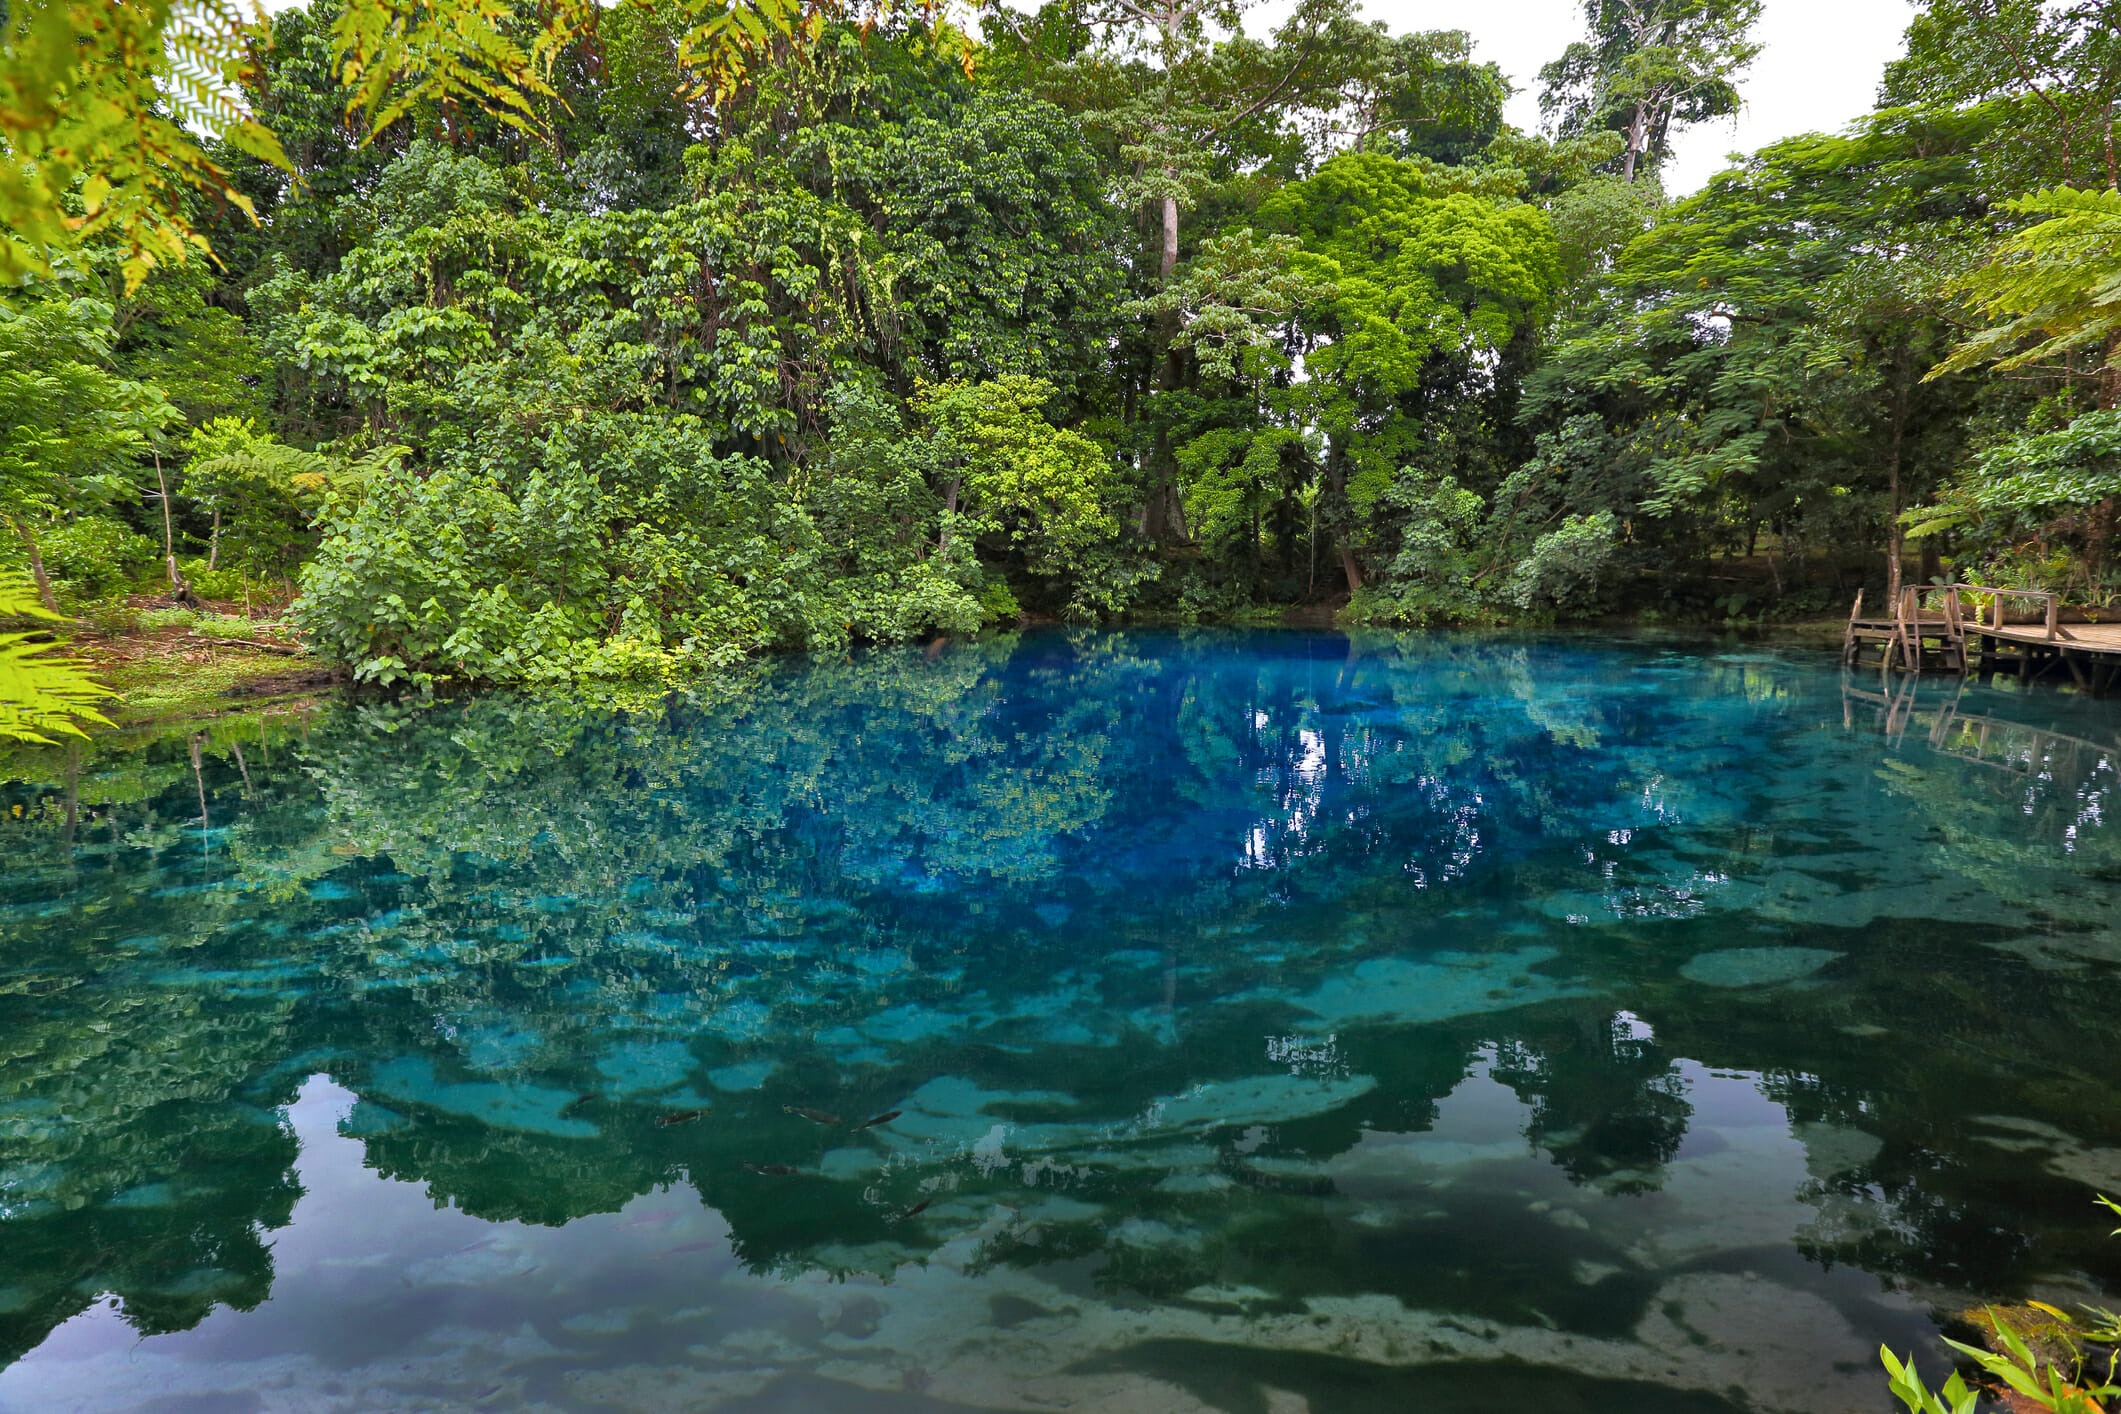 The deep Blue waters of the Nanda Blue hole containing fresh water fish which tourists can swim with.